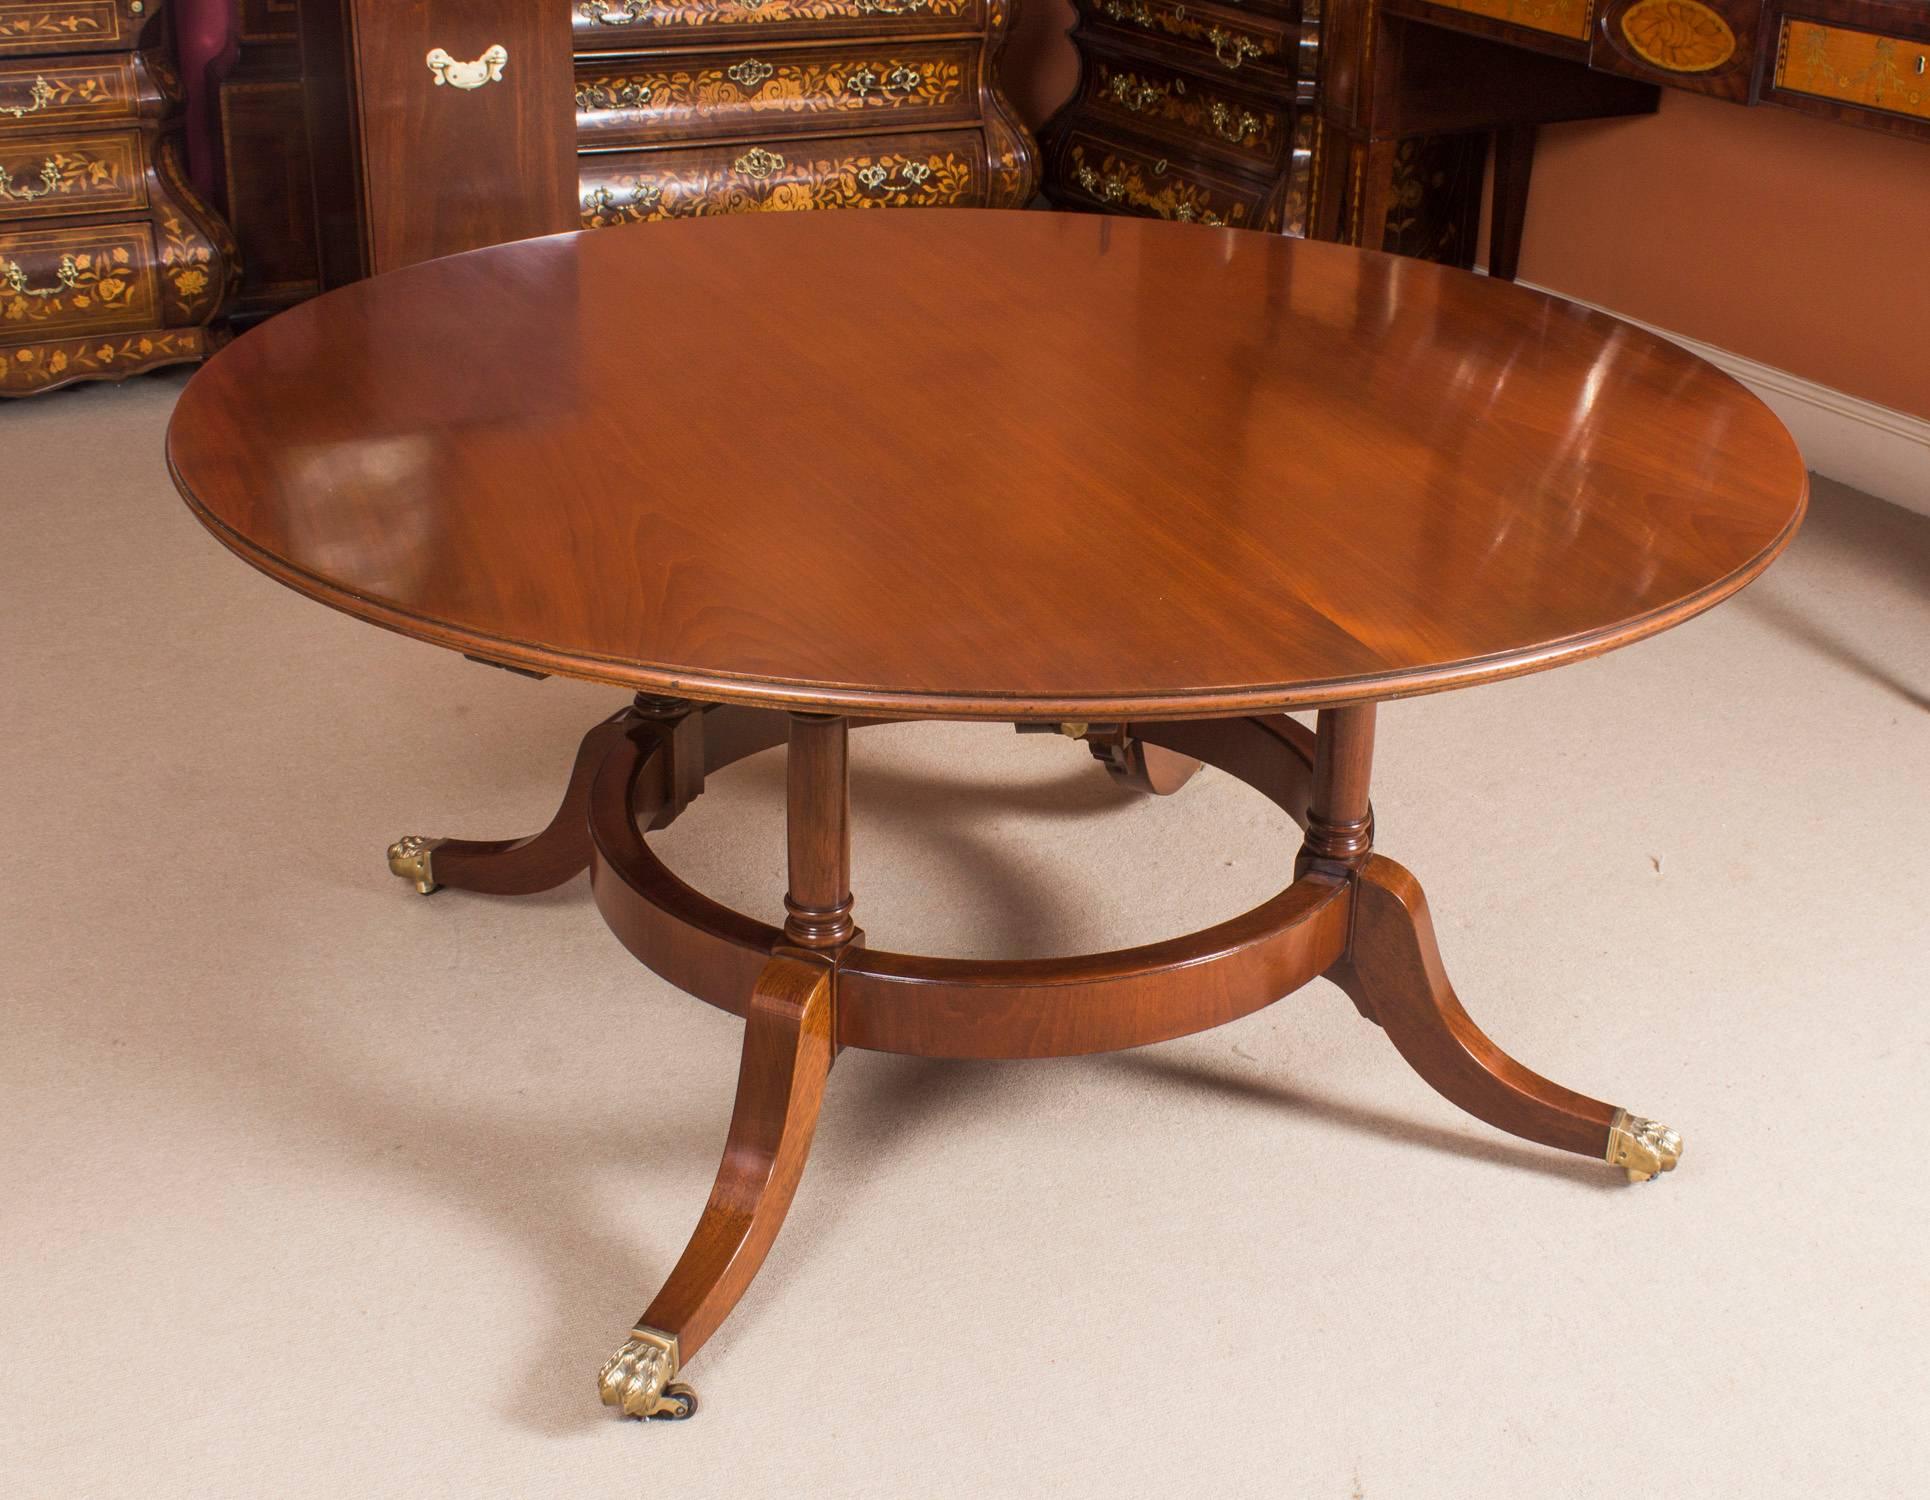 This is a beautiful Regency Revival Jupe style dining table, dating from the mid-20th century.

The table has a solid mahogany top that has five additional leaves that can be added around the circumference. It is very stable as it has a circular